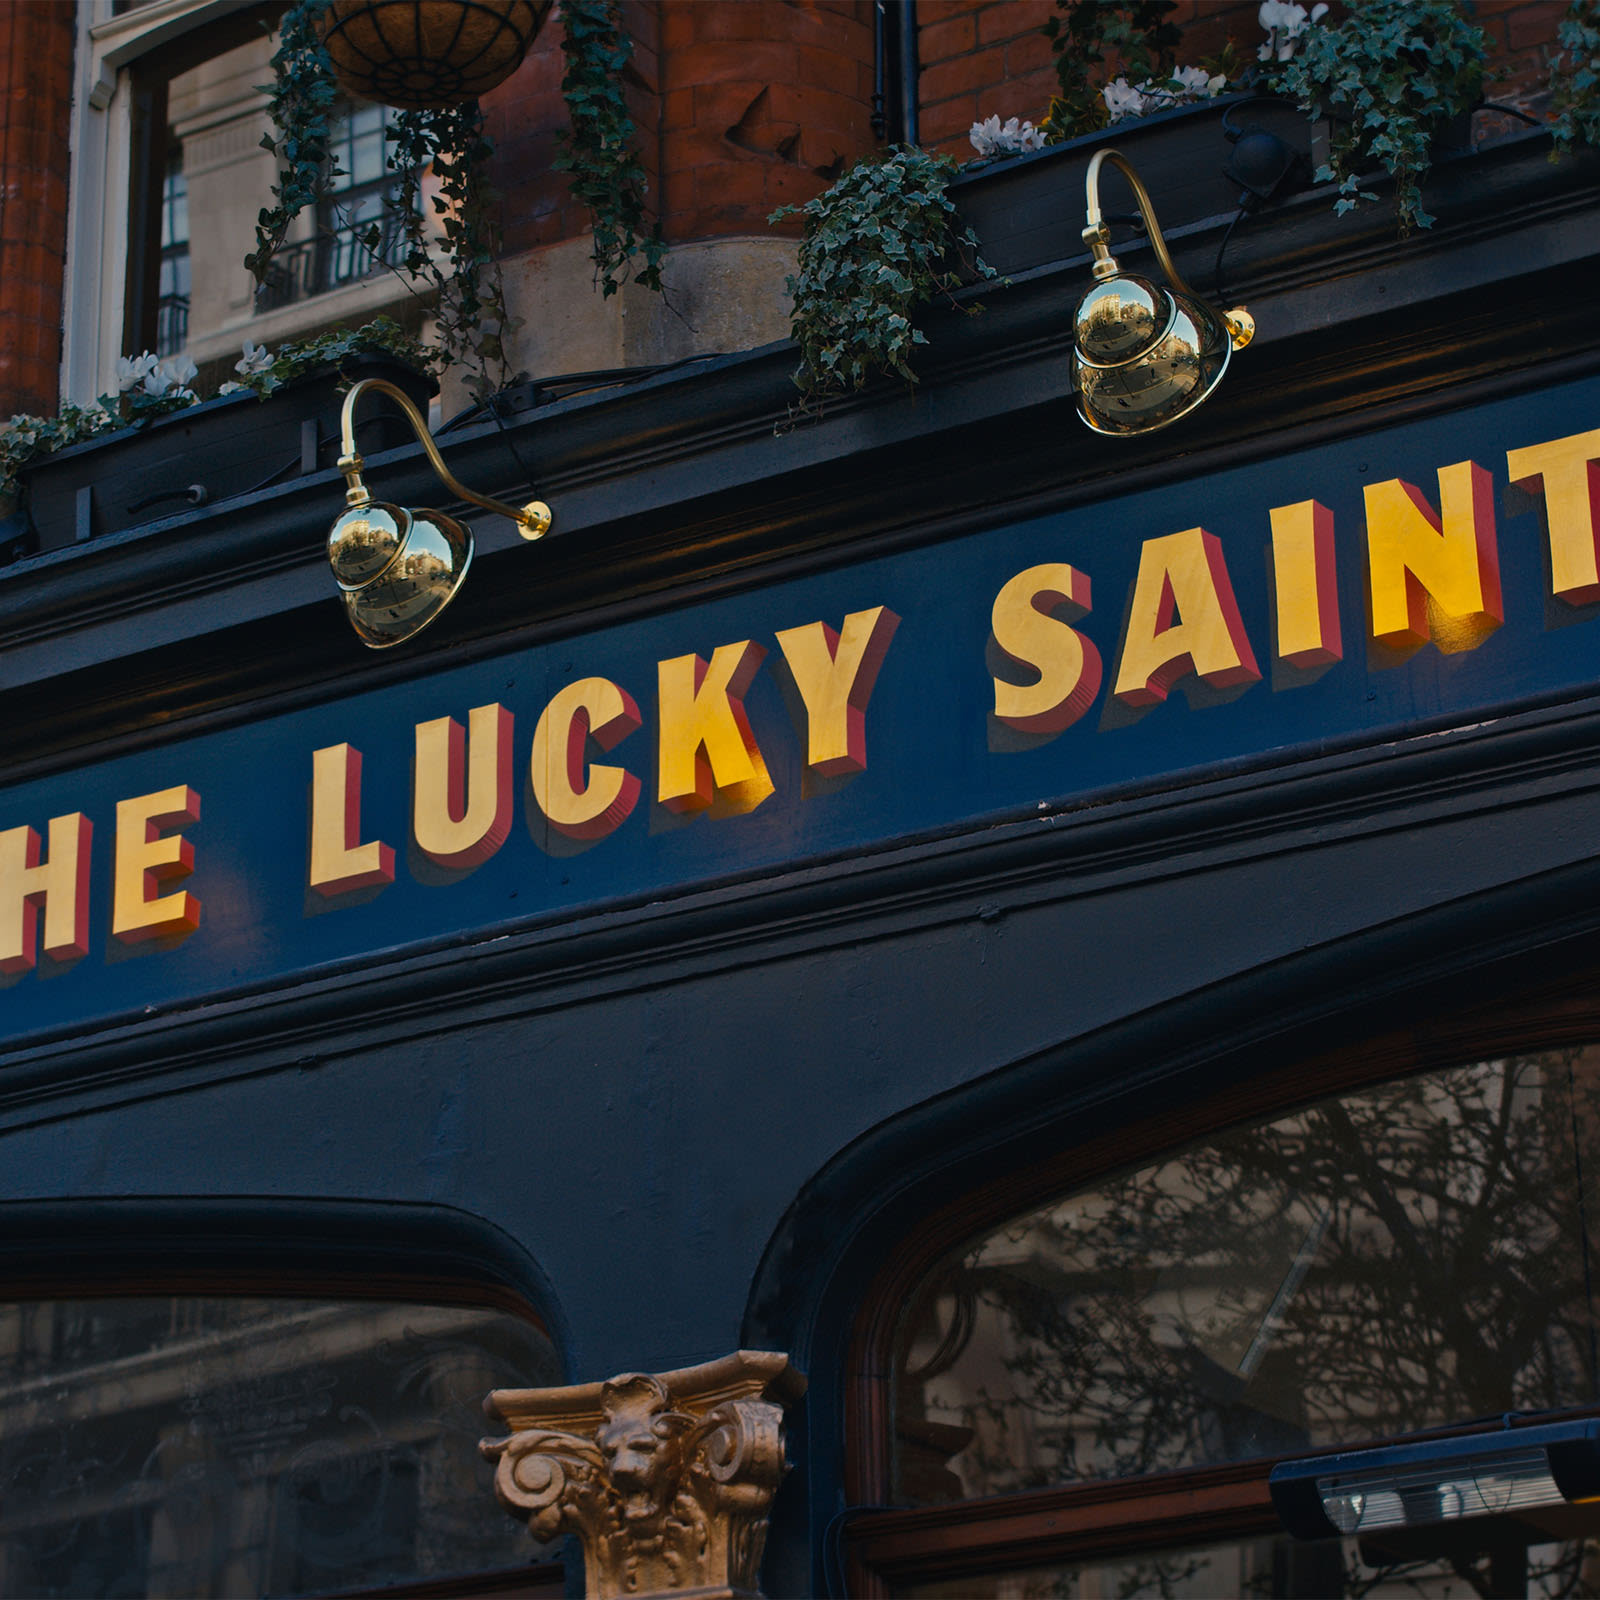 The Lucky Saint pub: putting non-drinkers first